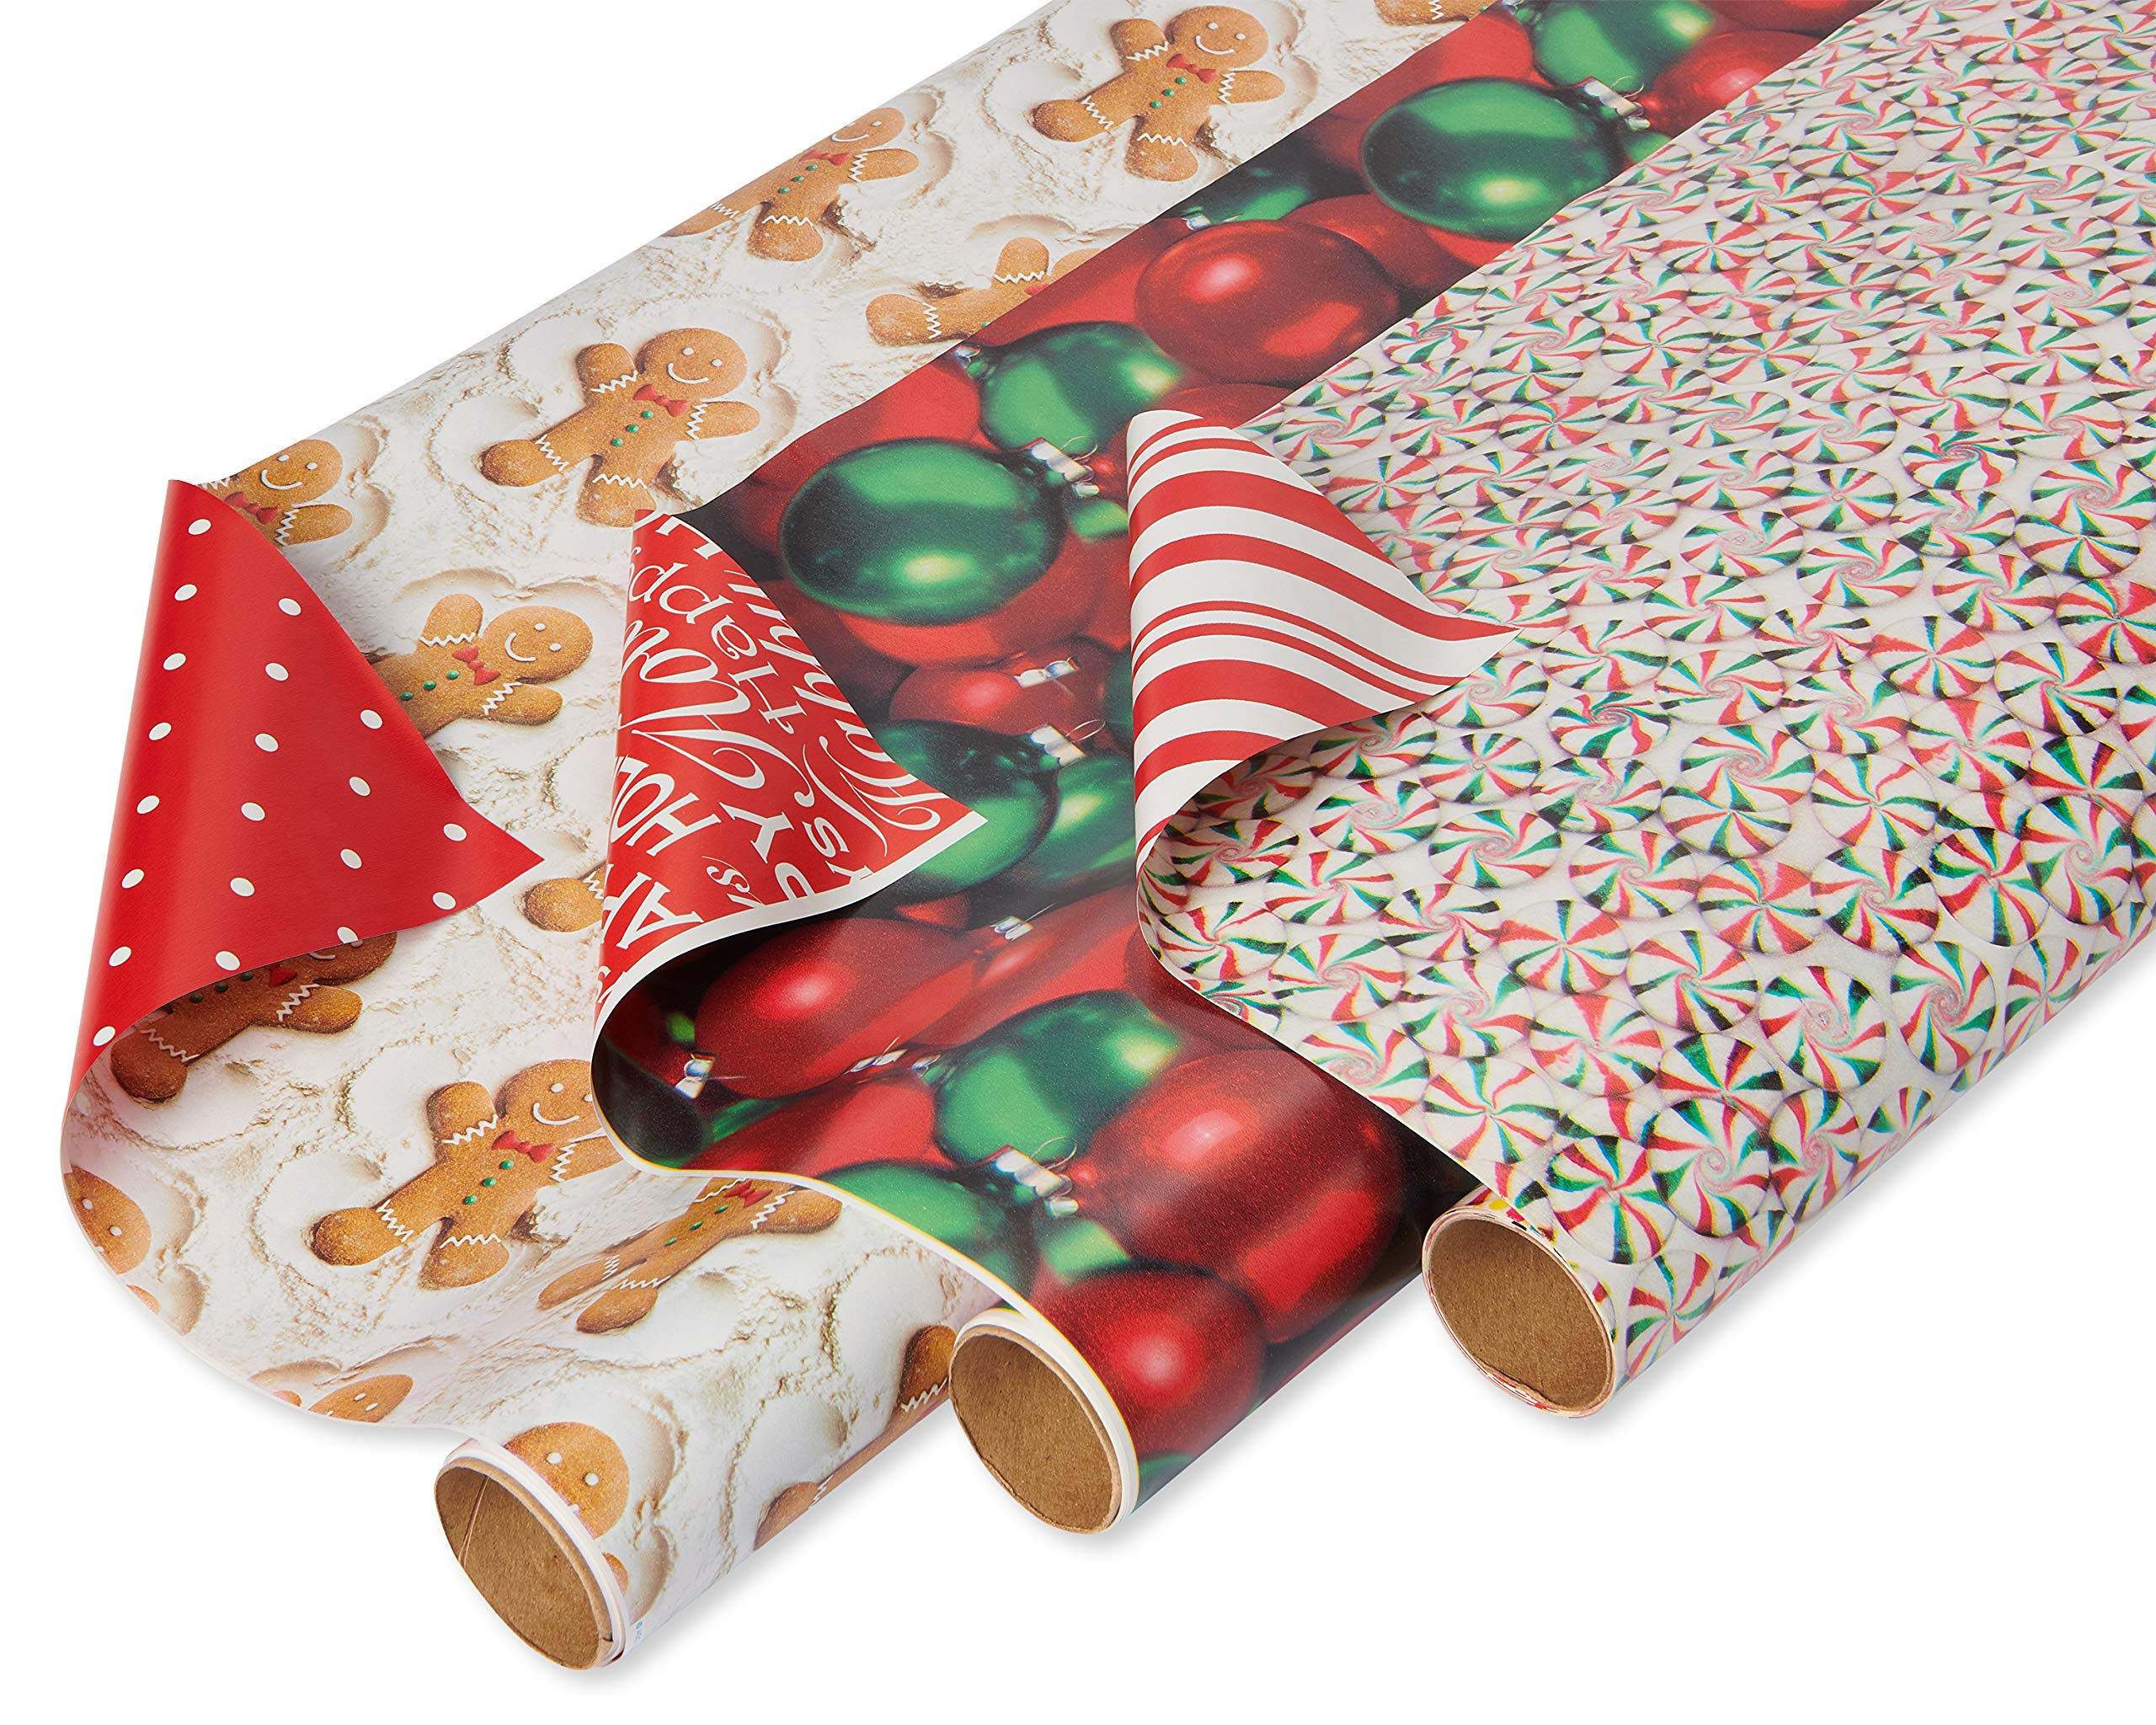 American Greetings Reversible Christmas Extra-Wide Wrapping Paper Bundle, Gingerbread, Ornaments and Peppermints (3 Rolls, 120 sq. ft.)